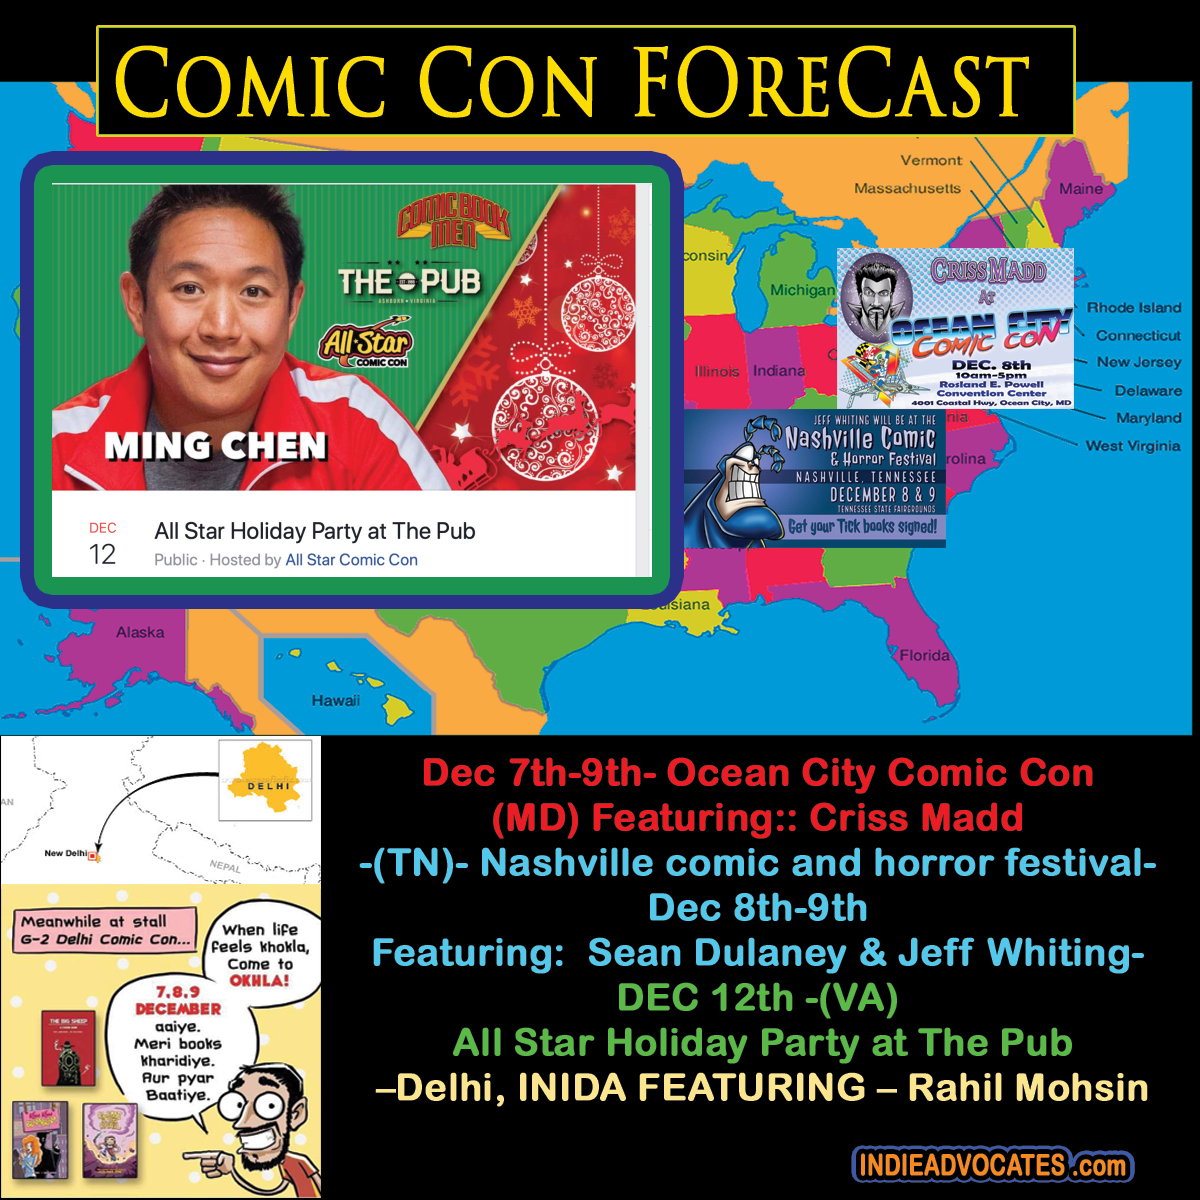 THE COMIC CON FORECAST:: -Dec 7th-9th-  Ocean City Comic Con (MD) Featuring:: Criss Madd -(TN)- Nashville comic and horror festival- Featuring:  Sean Dulaney & Jeff Whiting- DEC 12th -(VA) All Star Holiday Party at The Pub –Delhi, INDIA FEATURING – Rahil Mohsin